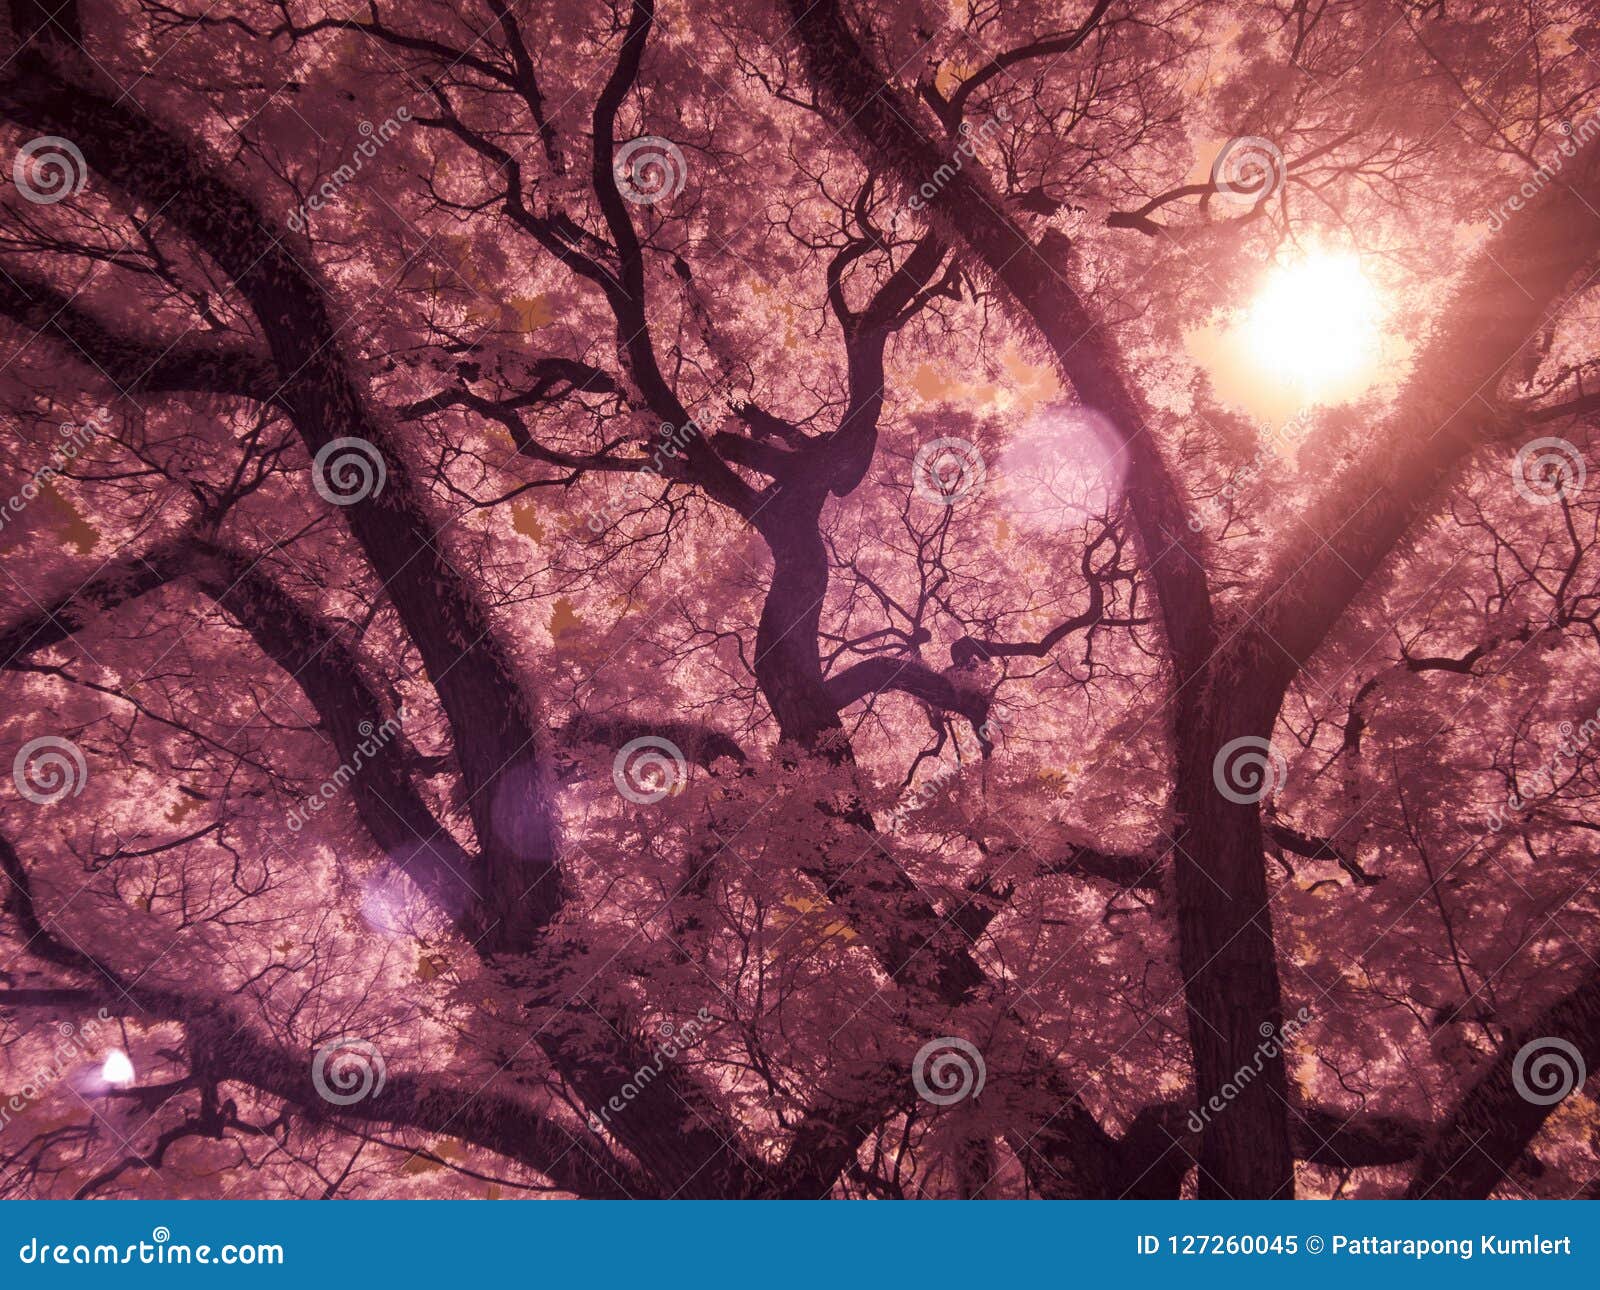 Infrared Fine Art Photography : Tree , Leaves , Forest Stock Image